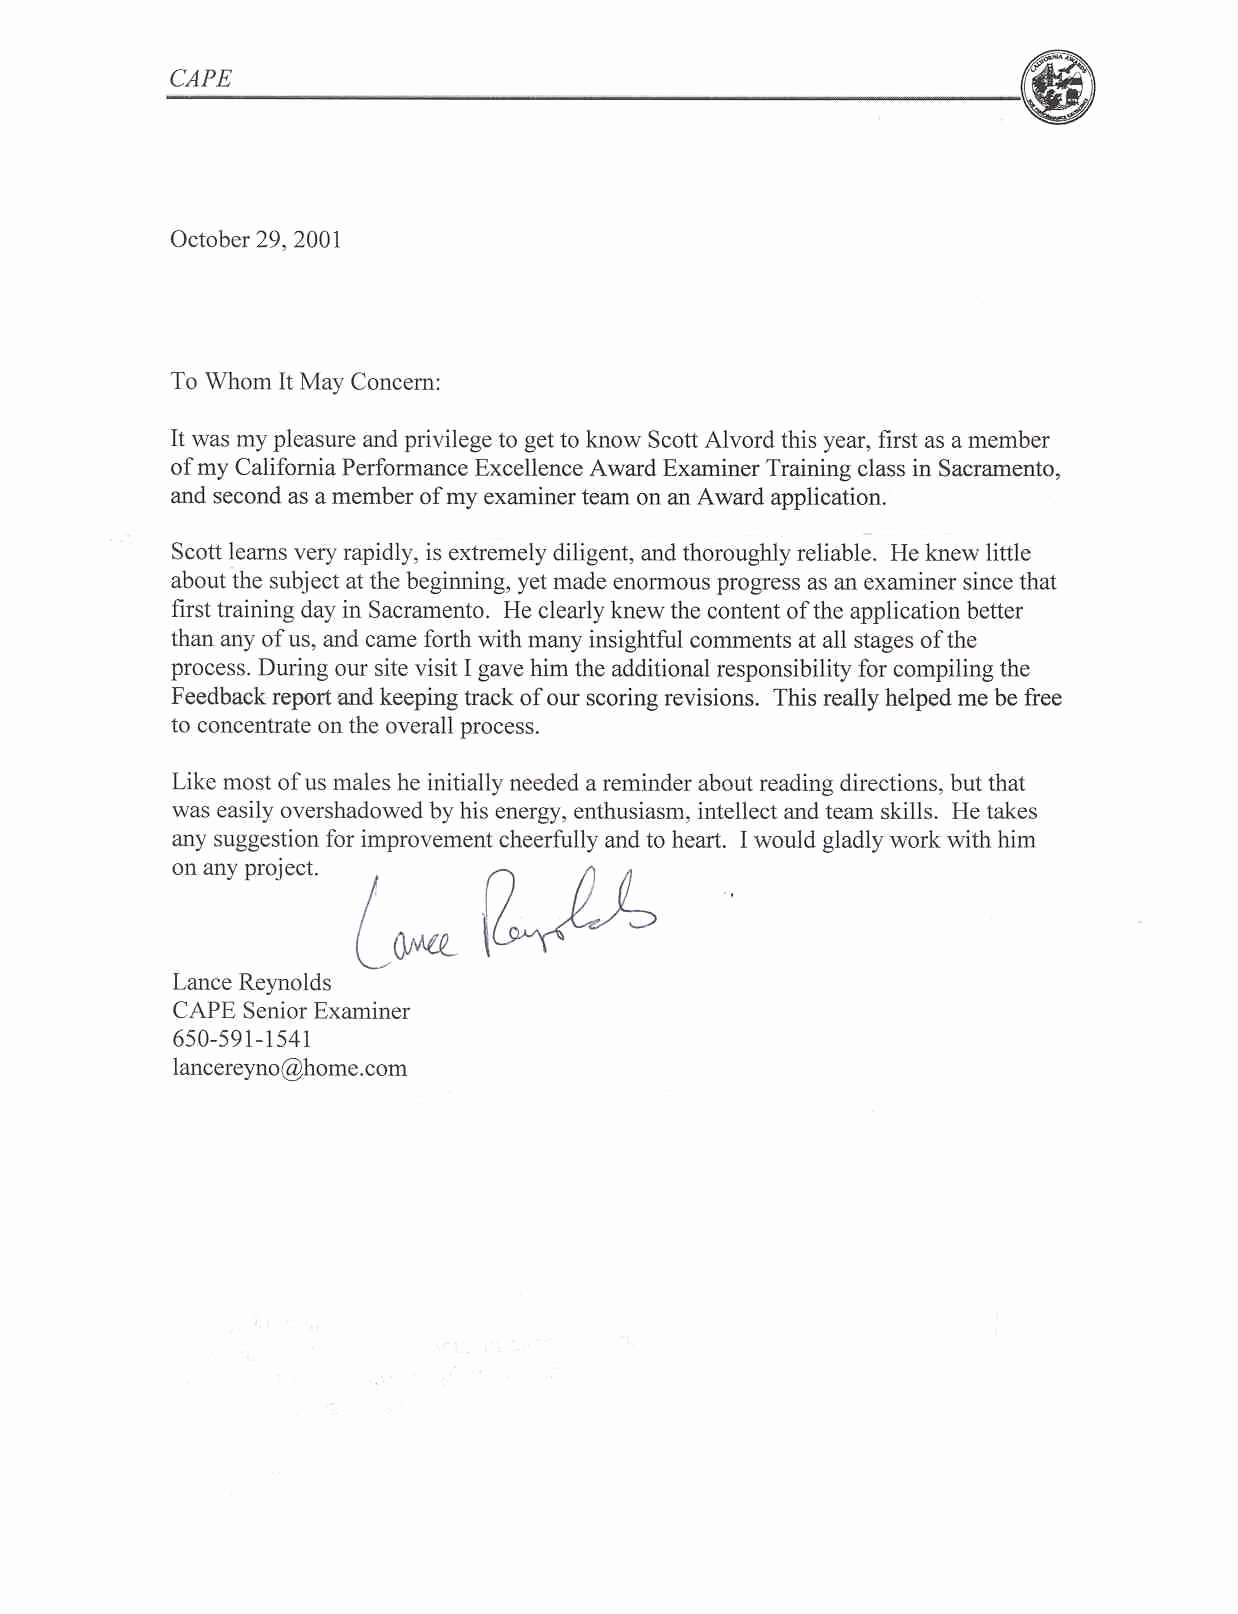 Confidential Letter Of Recommendation Best Of Tips for Writing A Letter Of Re Mendation